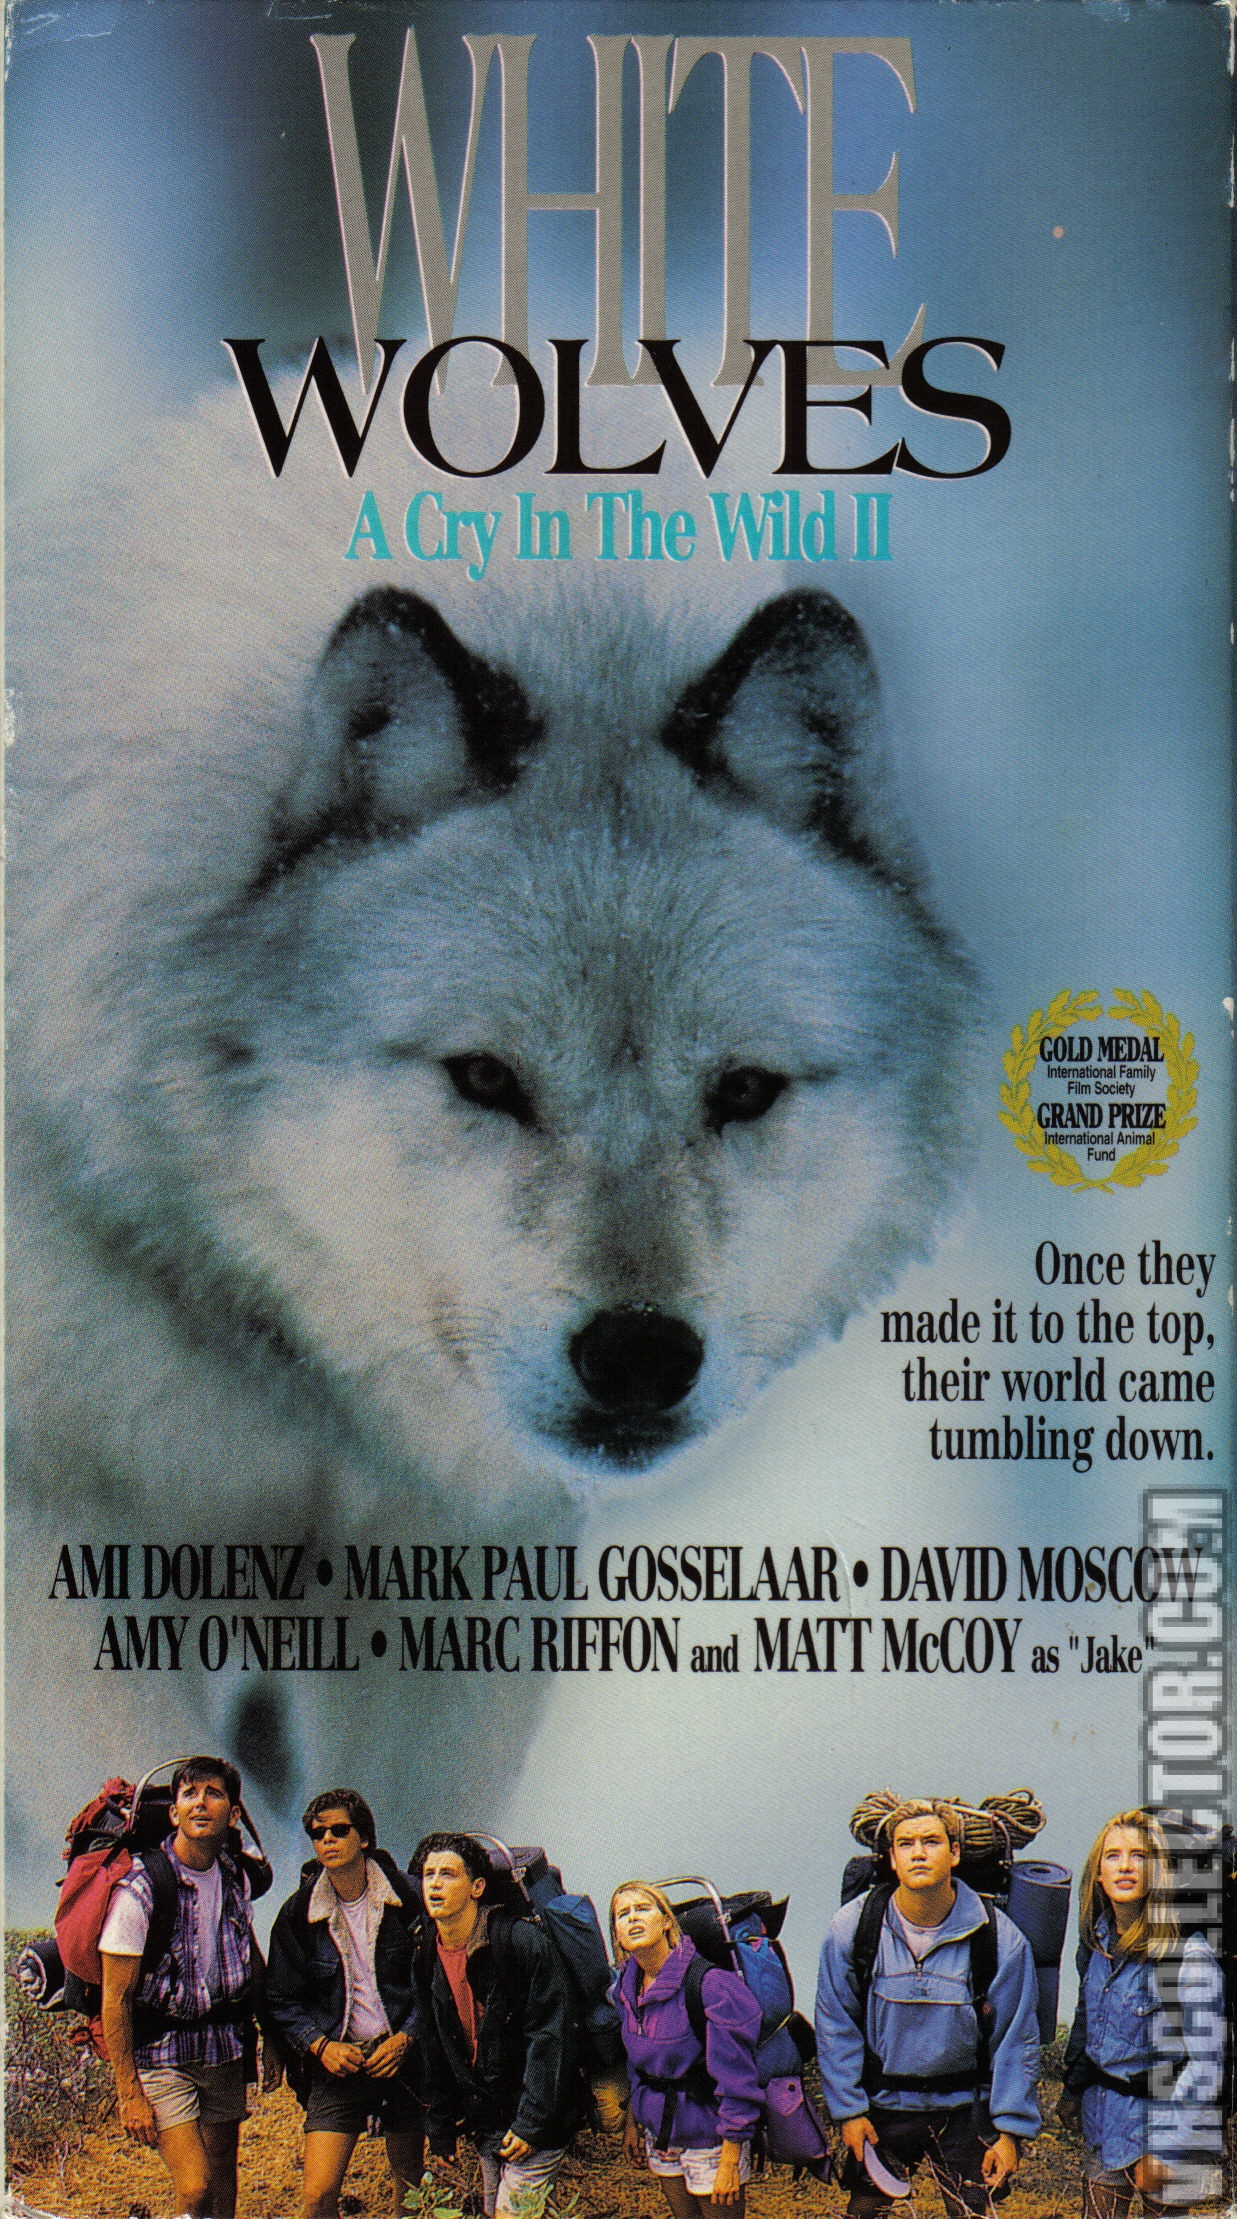 White Wolves: A Cry In The Wild II | VHSCollector.com